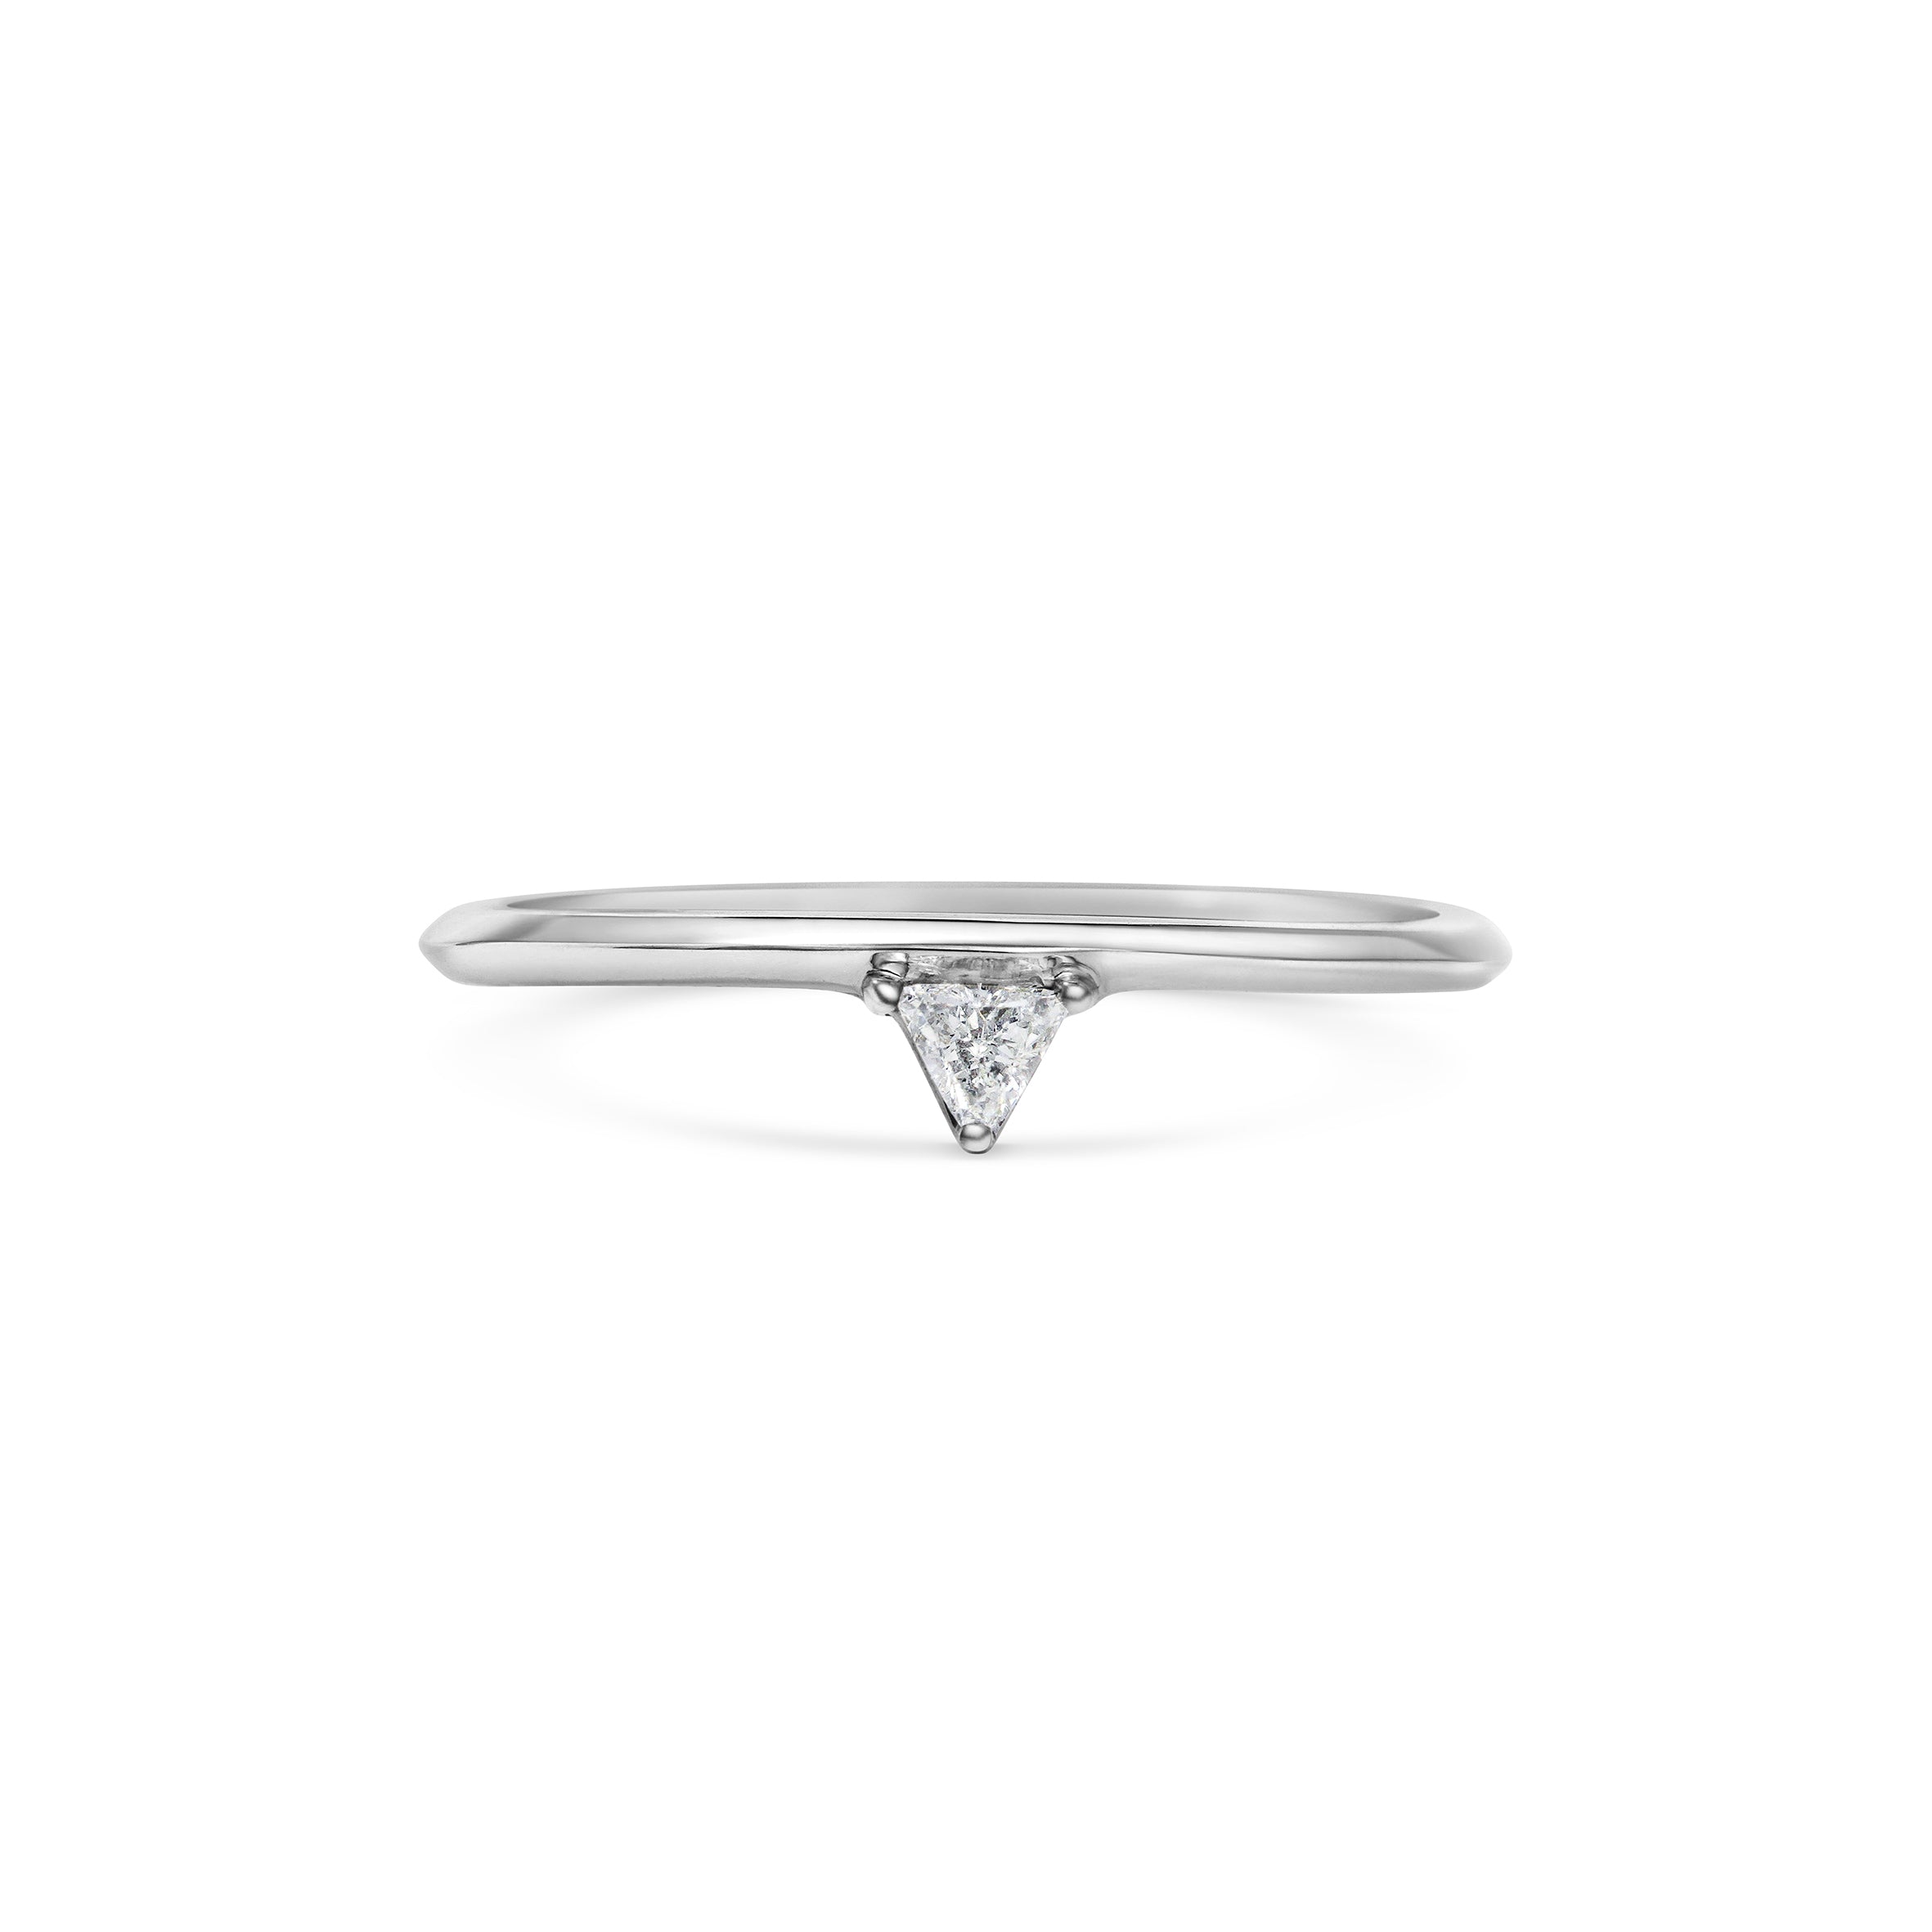 The Ilud Ring by East London jeweller Rachel Boston | Discover our collections of unique and timeless engagement rings, wedding rings, and modern fine jewellery.